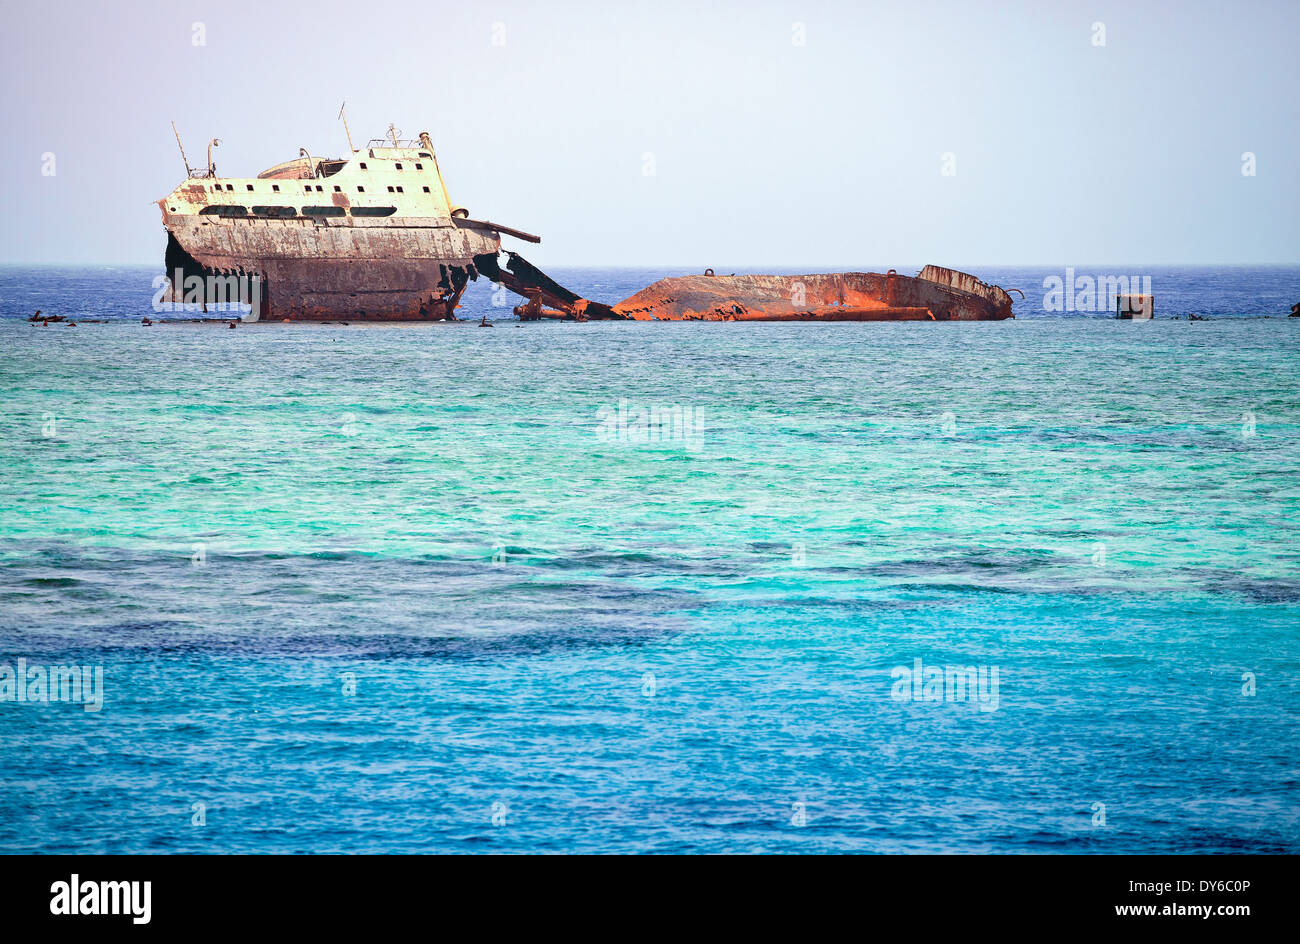 Shipwreck on the reef, Egypt, Red Sea. Stock Photo